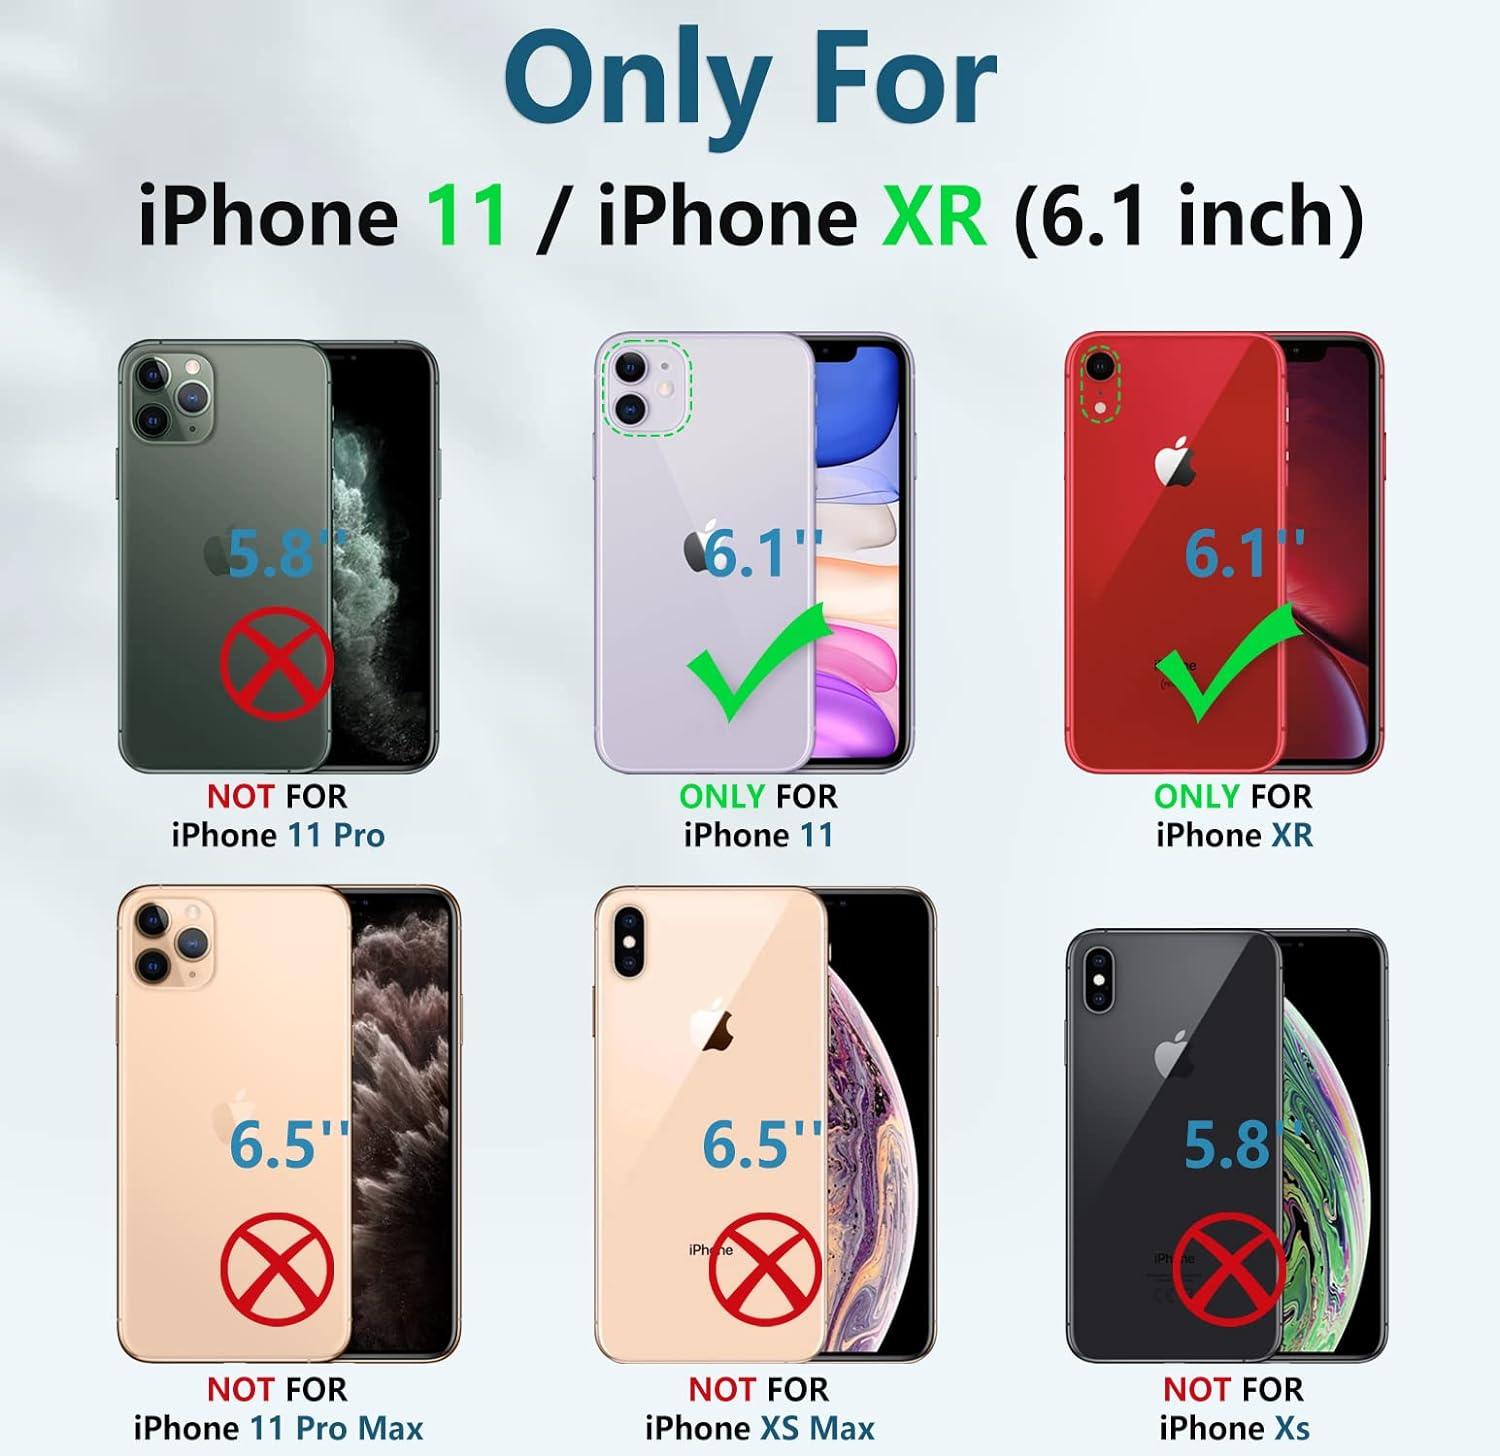 iPhone 11 iPhone XR Case Drop Protection Rugged with Belt-Clip Holster & Kickstand - FNTCASE OFFICIAL